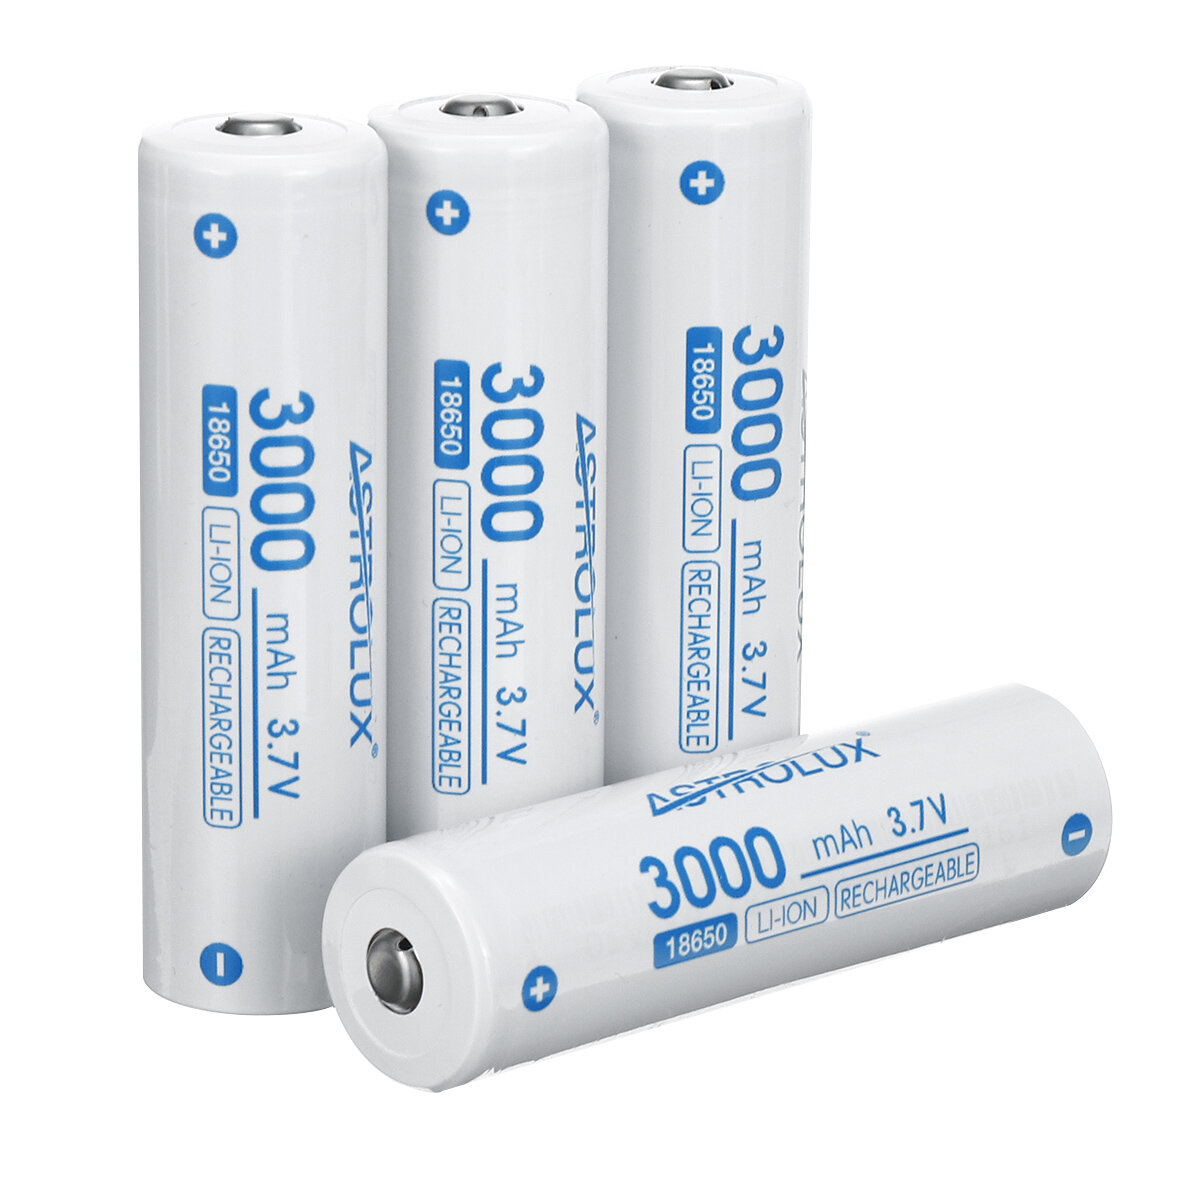 4Pcs Astrolux? C1830 3000mAh 3.7V 18650 Unprotected Li-ion Battery Rechargeable Lithium Power Cell 9